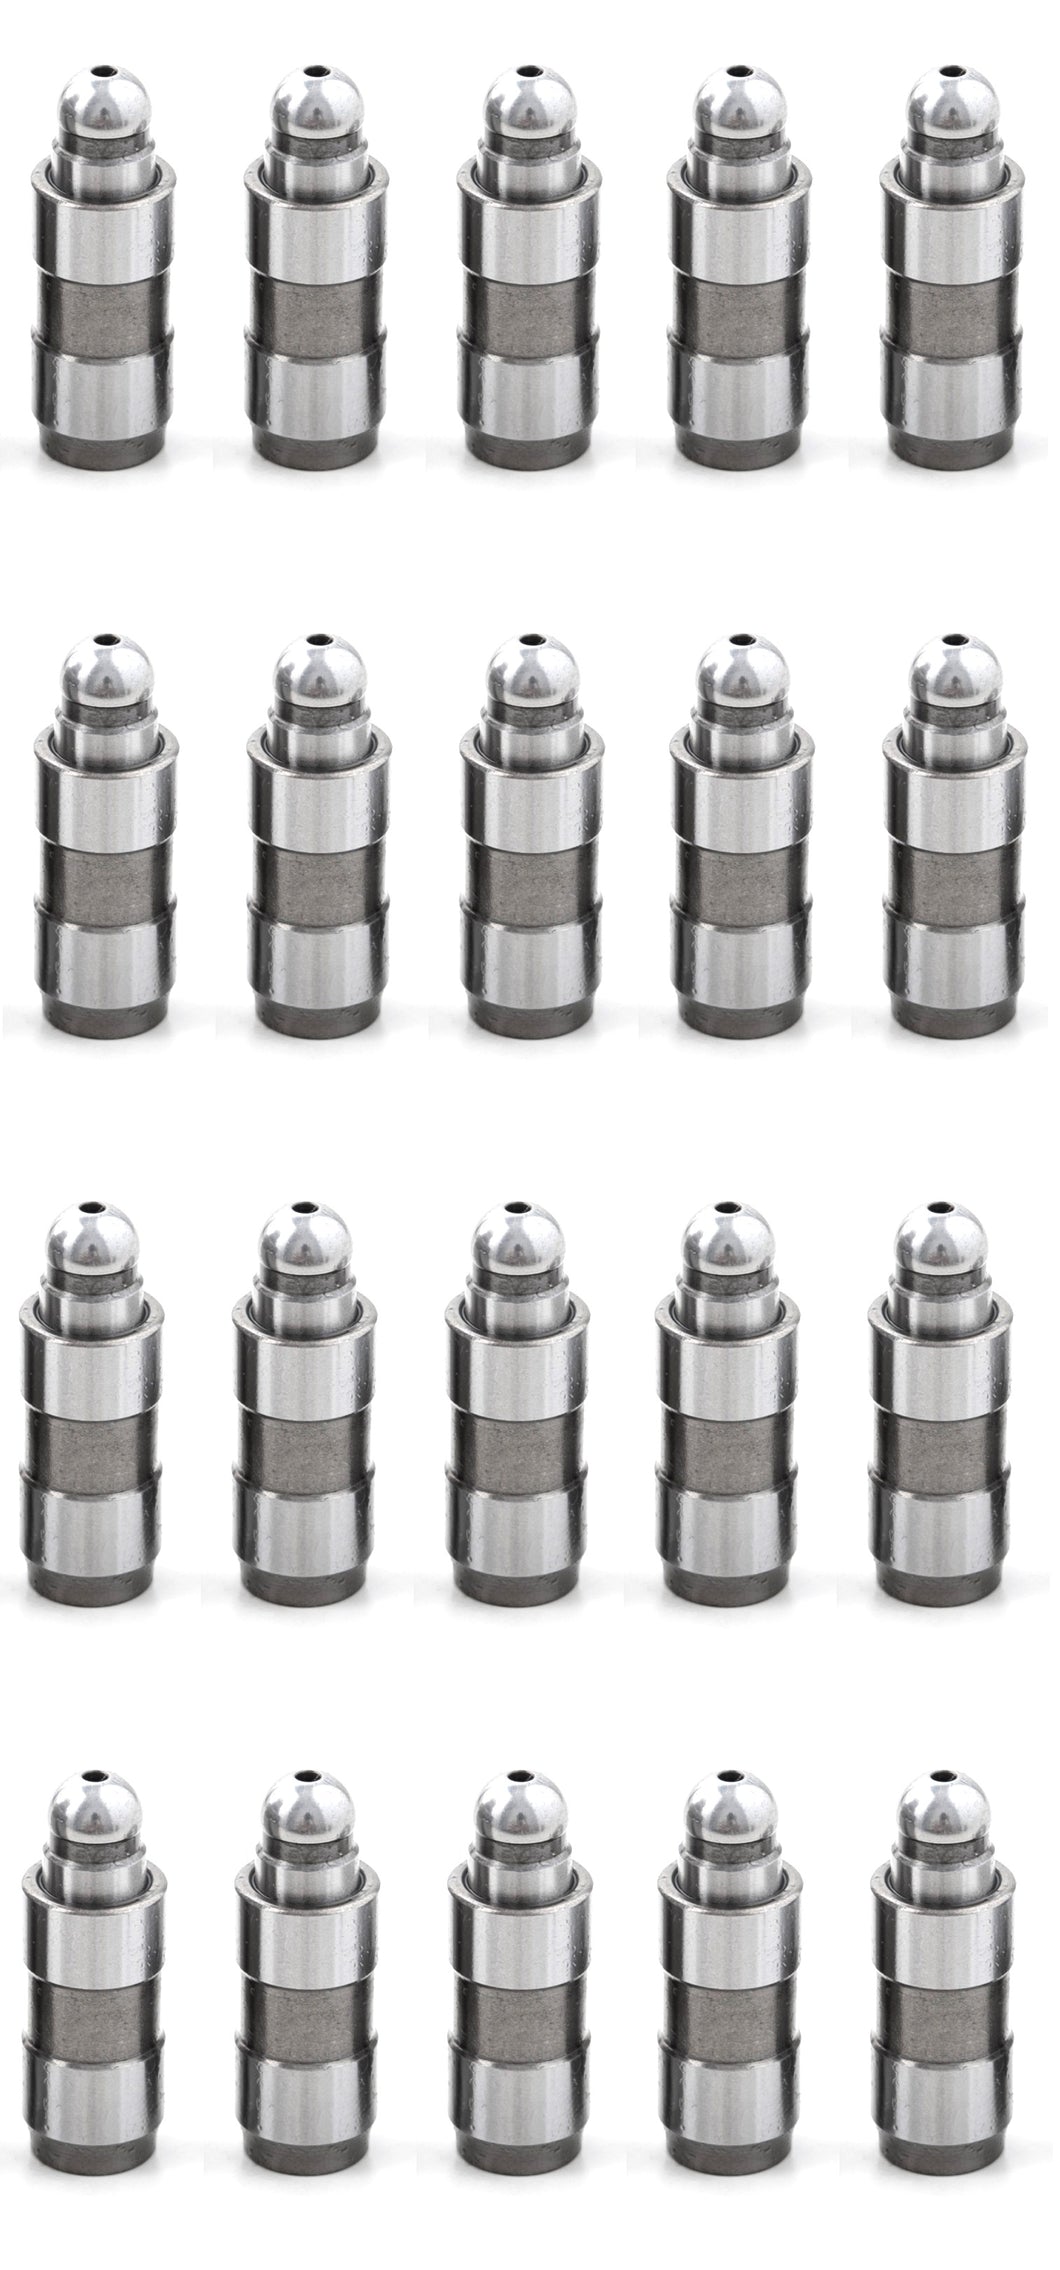 20 x hydraulic lifters for Mitsubishi Minica Toppo 4A30, 3G81, 3G83, 4A31